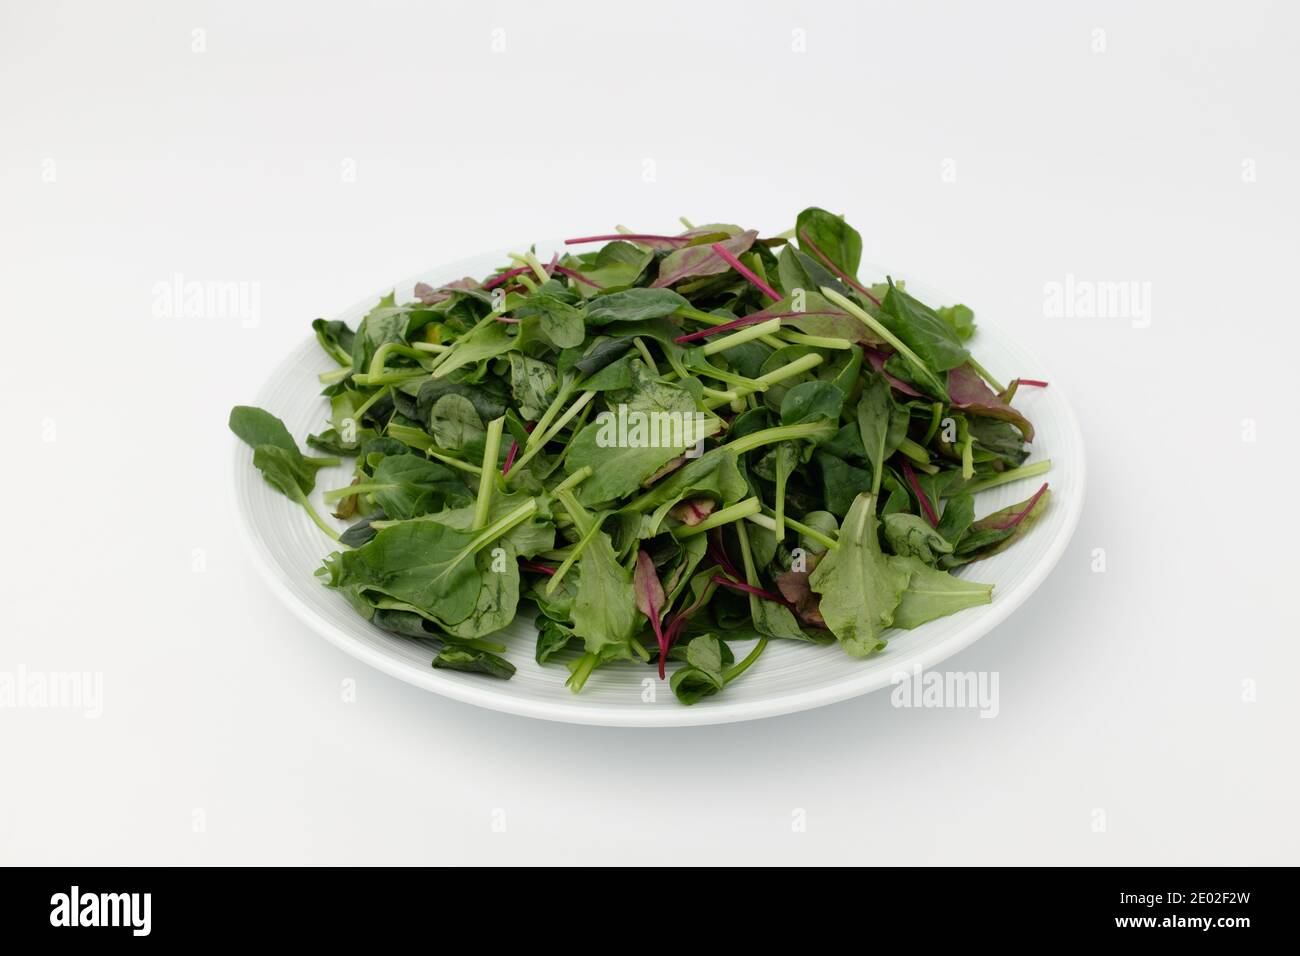 Young leaf vegetable on white background Stock Photo